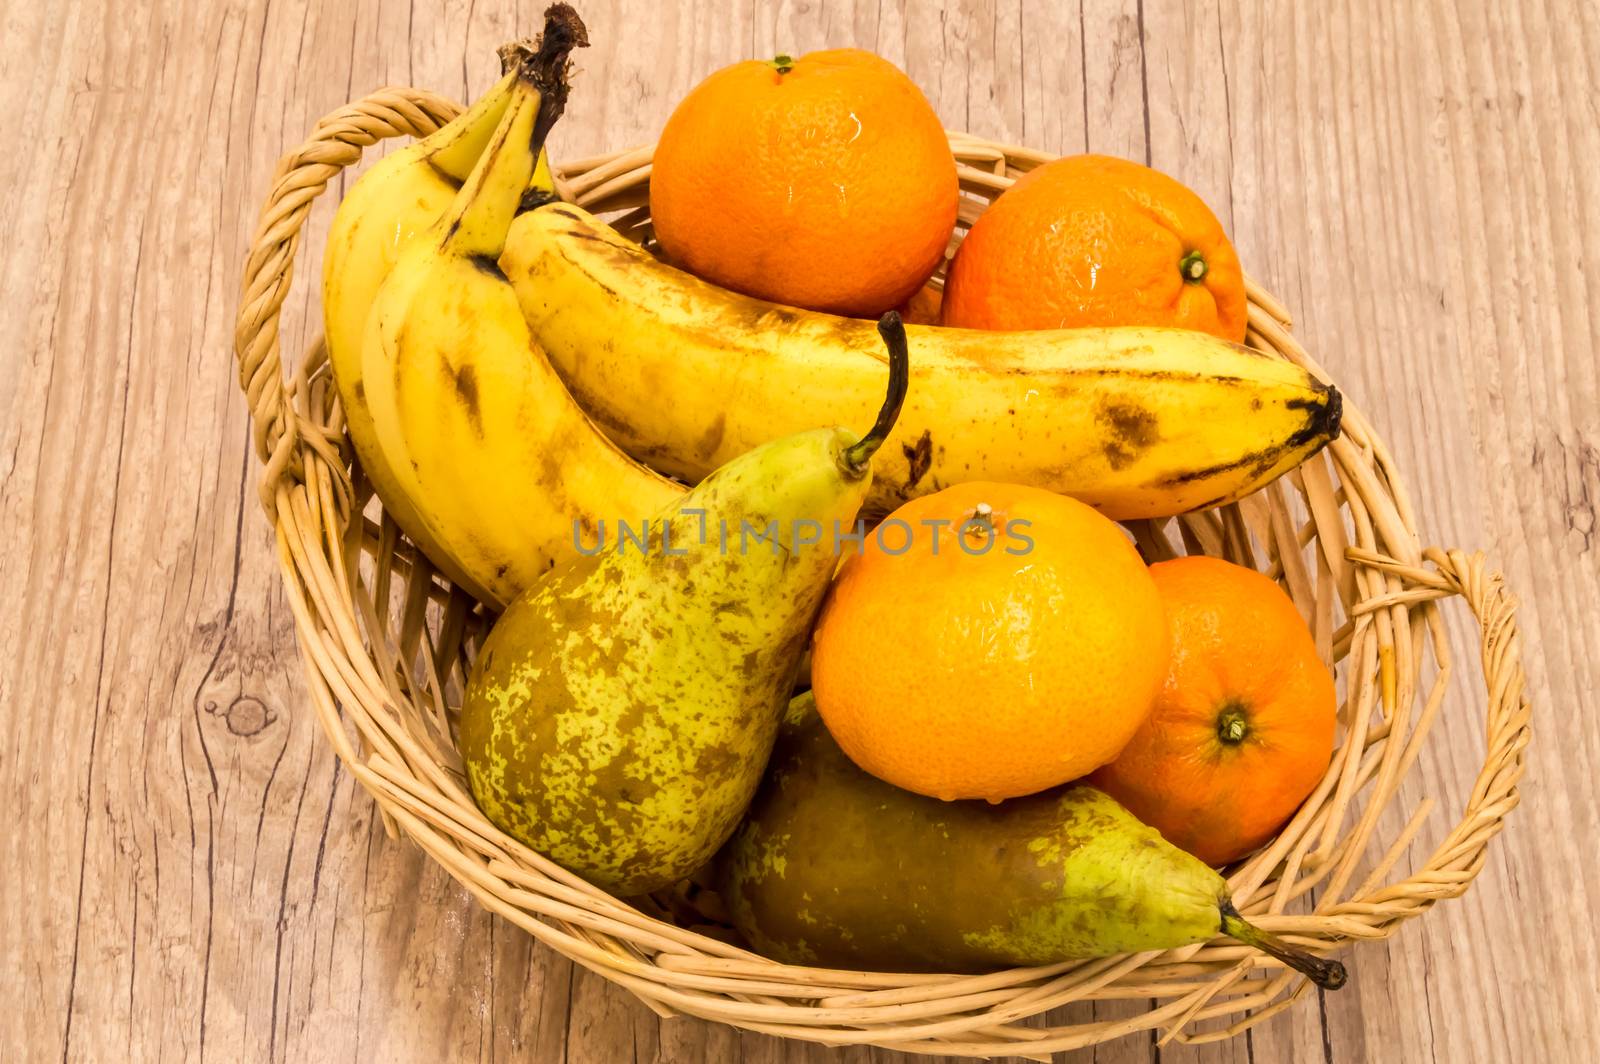 Healthy food. Organic fruits and vegetables, bananas, clementine by Philou1000